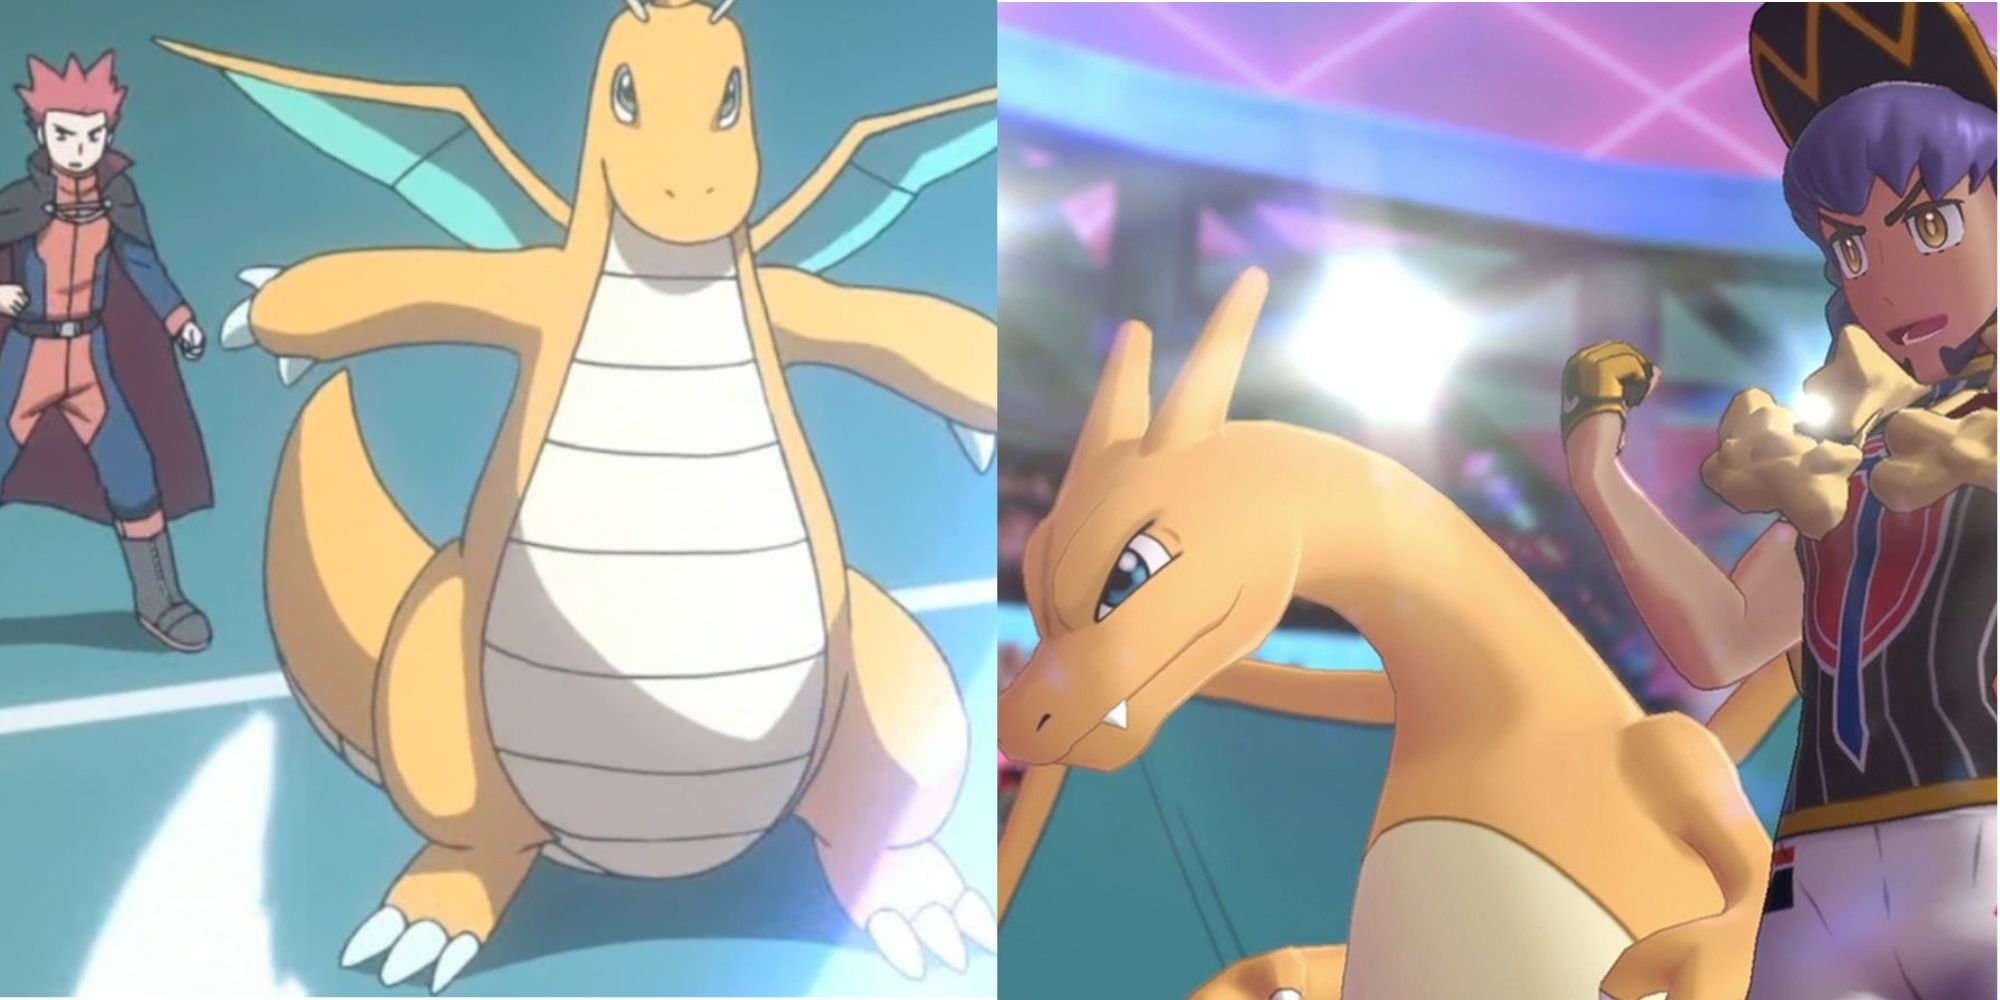 Pokemon Best Duos : Lance & Dragonite to the left. Leon & Charizard to the right.